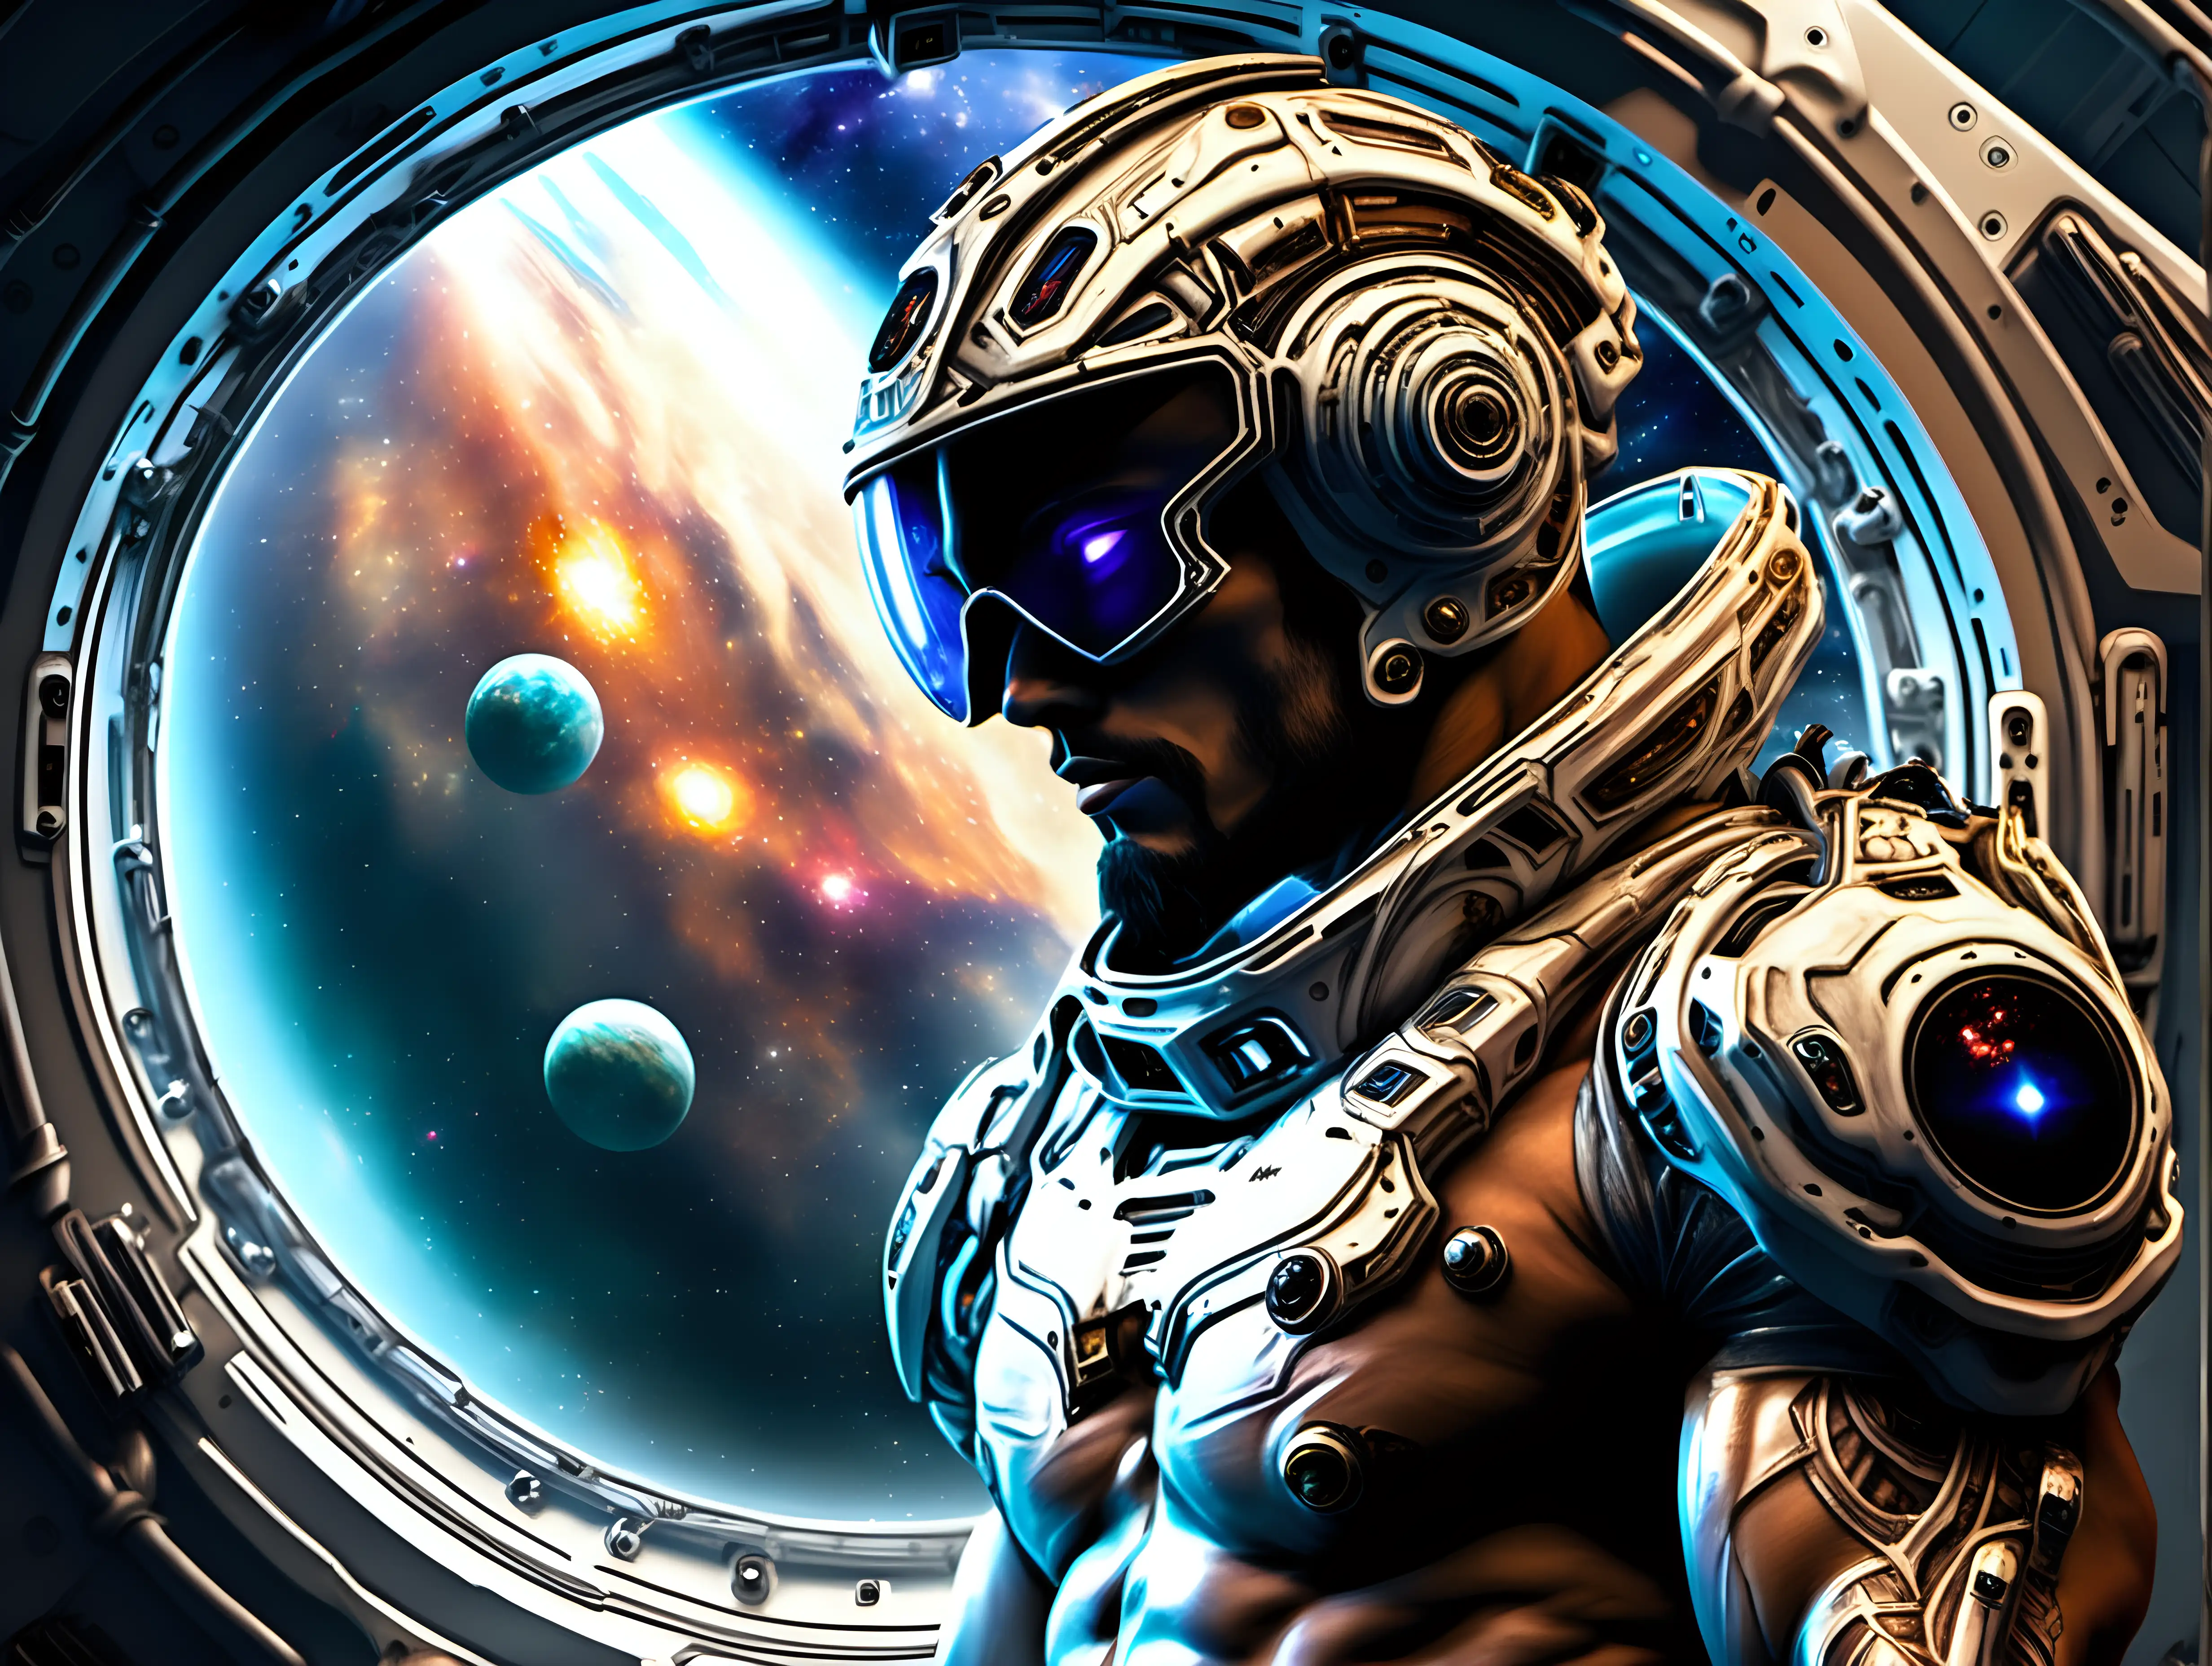 Naked muscular big bulge male space pirate, on a spaceship, shoulder armor, helmet, robotic eye, visor, dreaming and watching outer space nebula through window